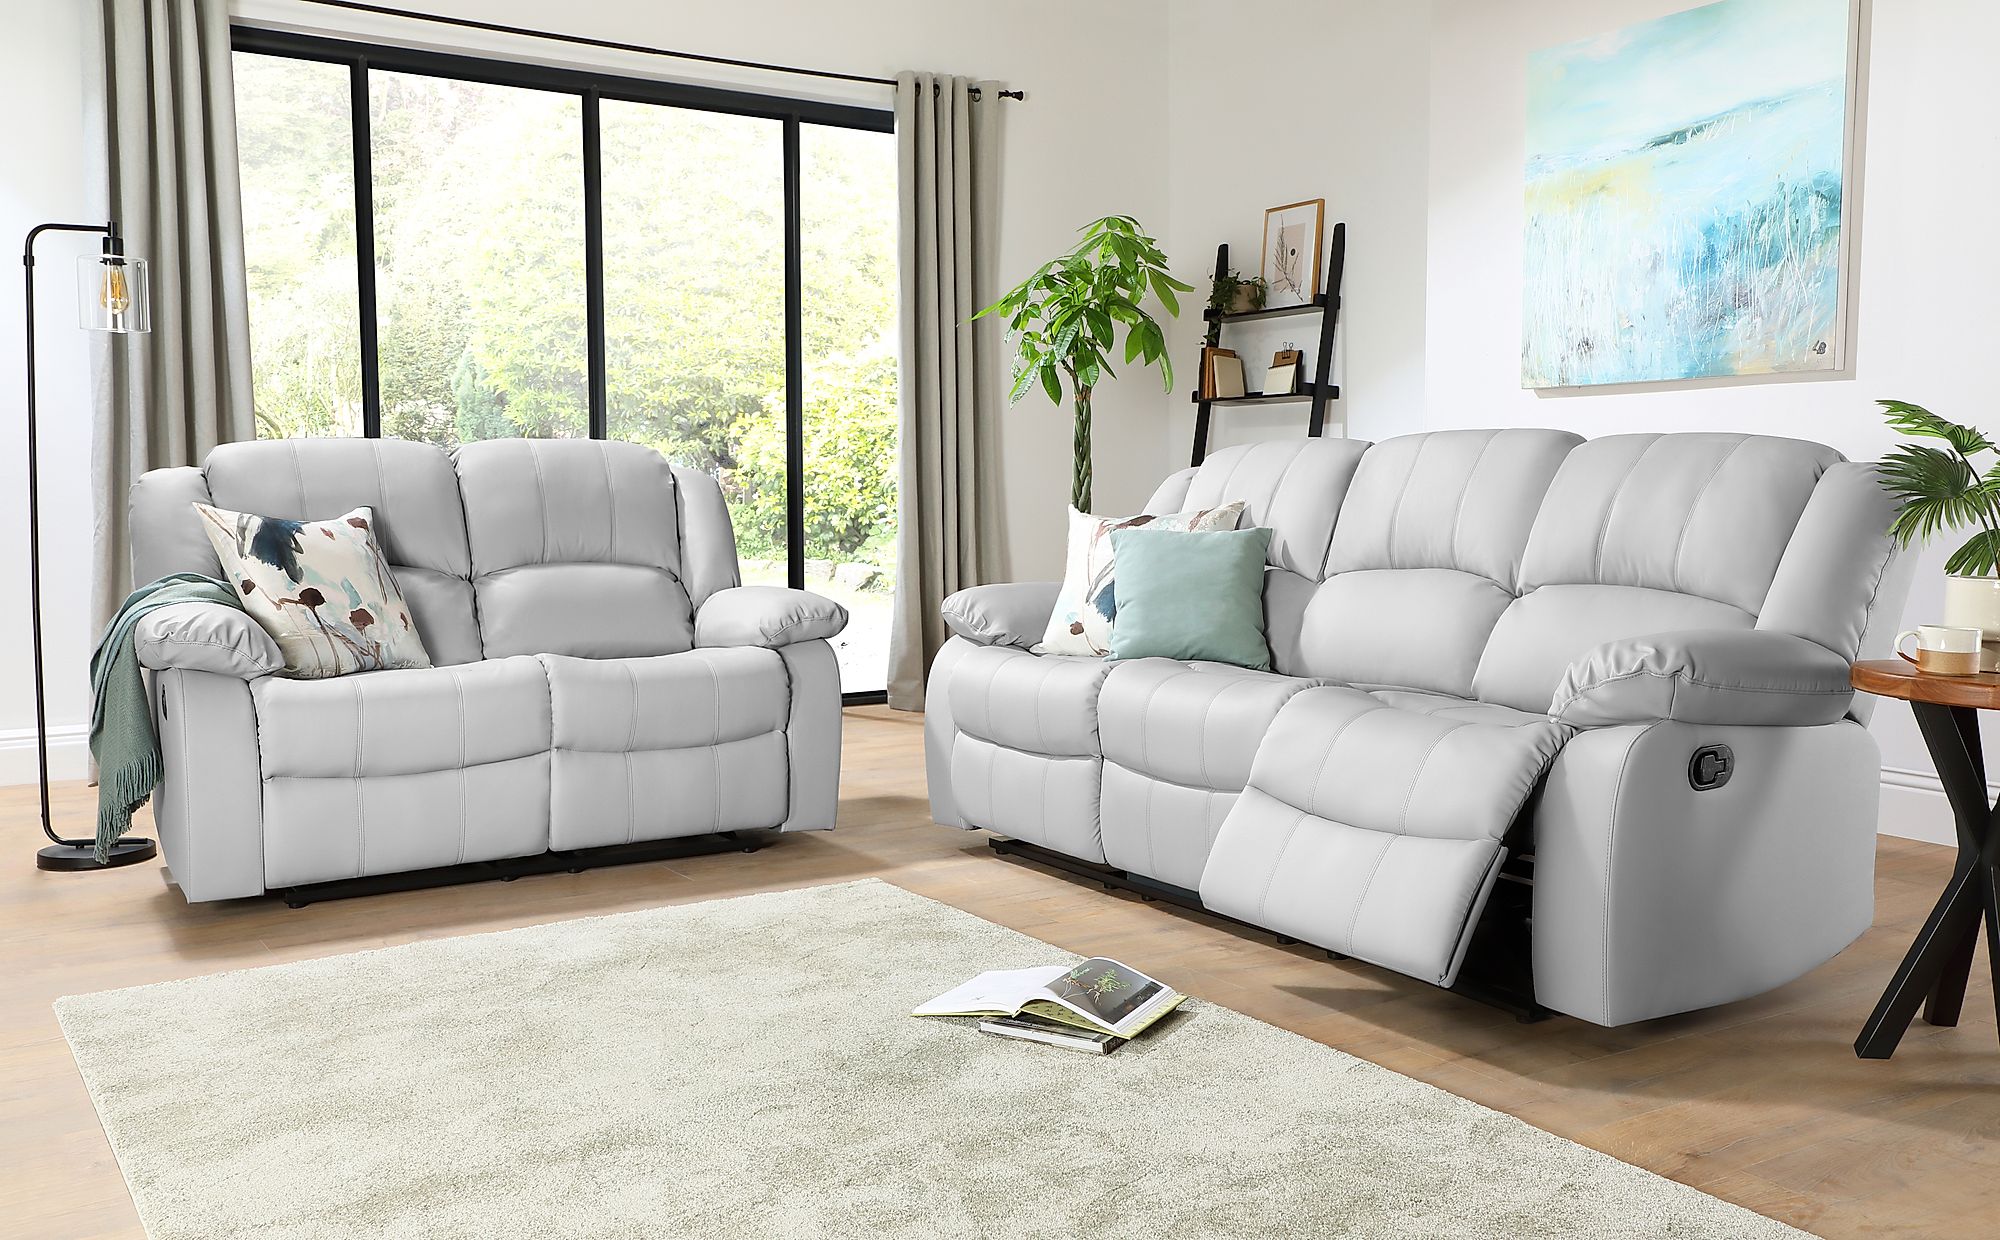 grey leather reclining sofa and loveseat